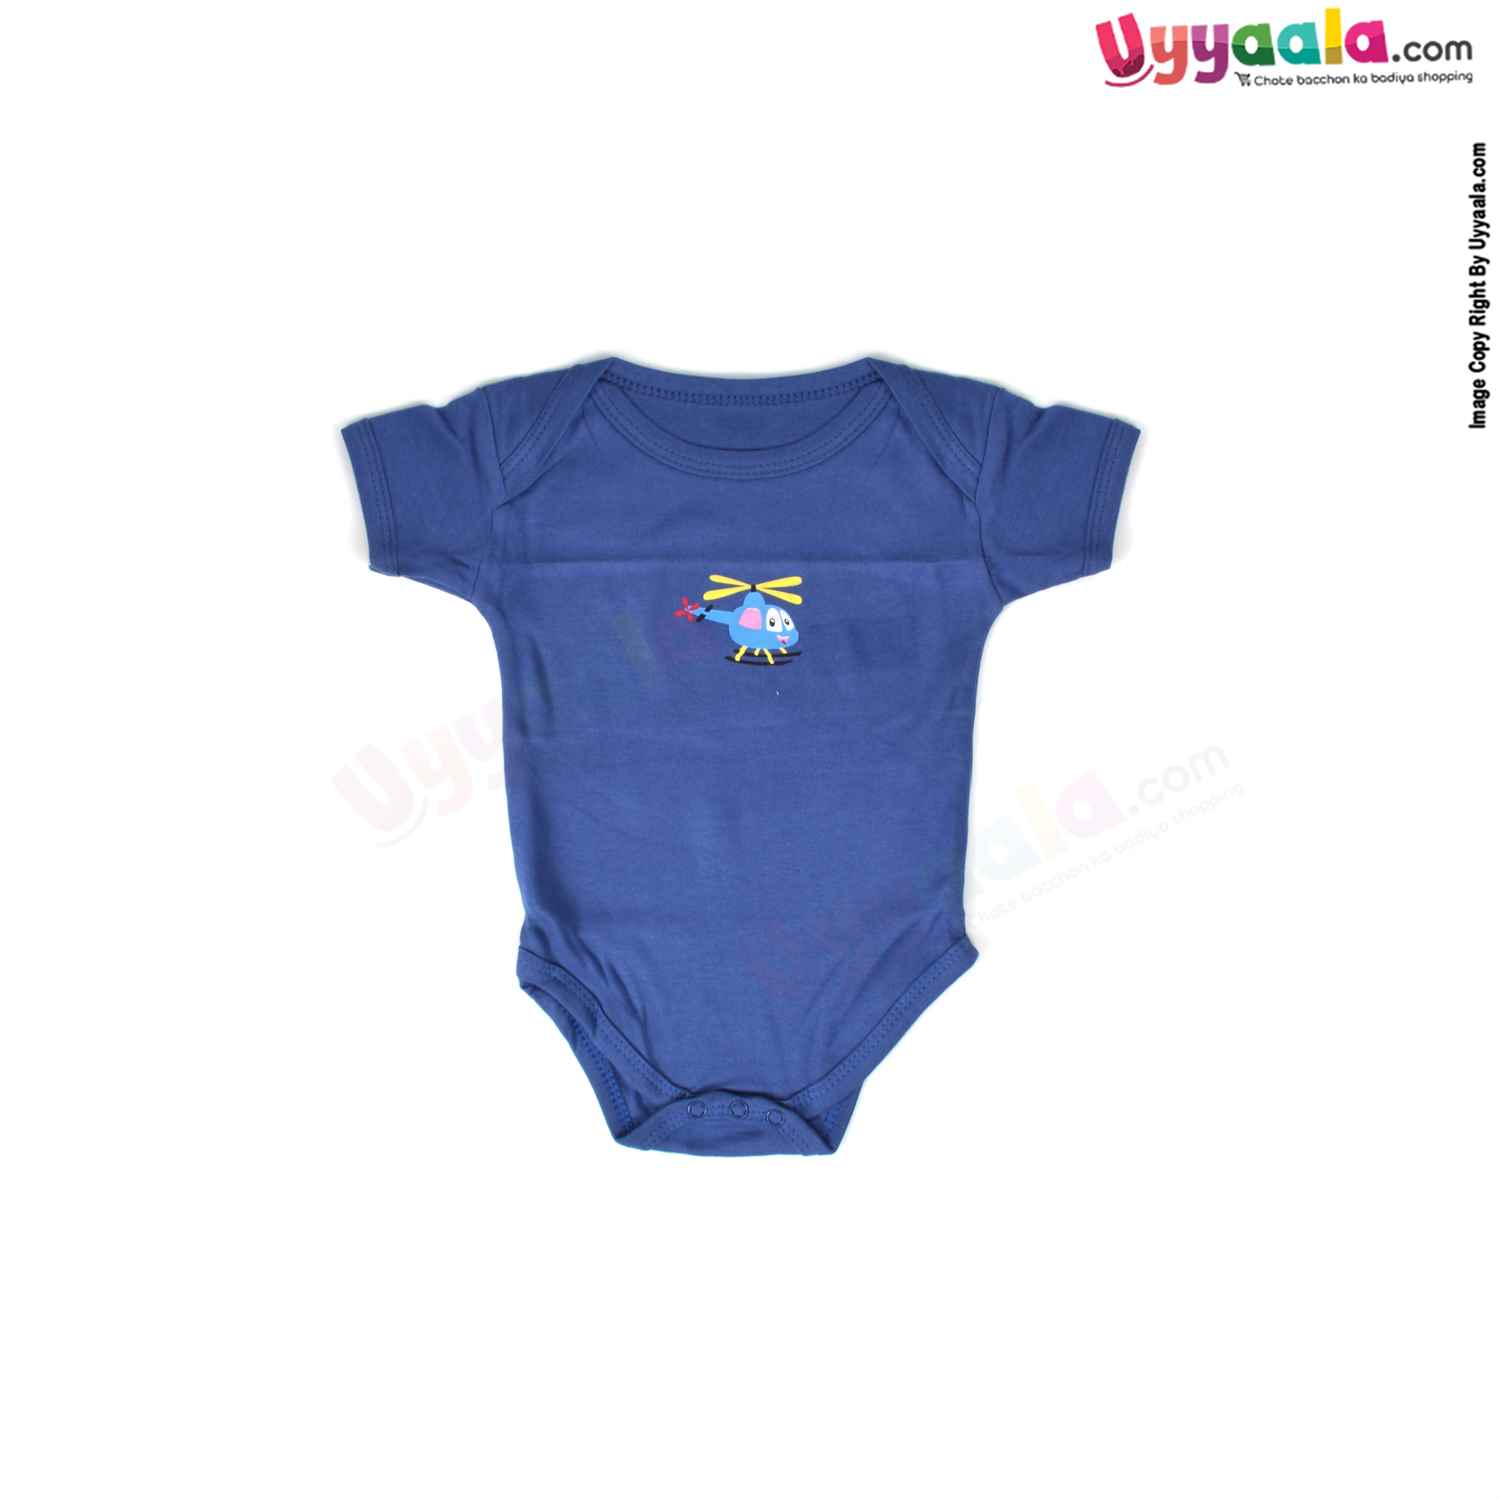 Precious One Short Sleeve Body Suit 100% Soft Hosiery Cotton - Navy Blue with Helicopter Print (3-6M)